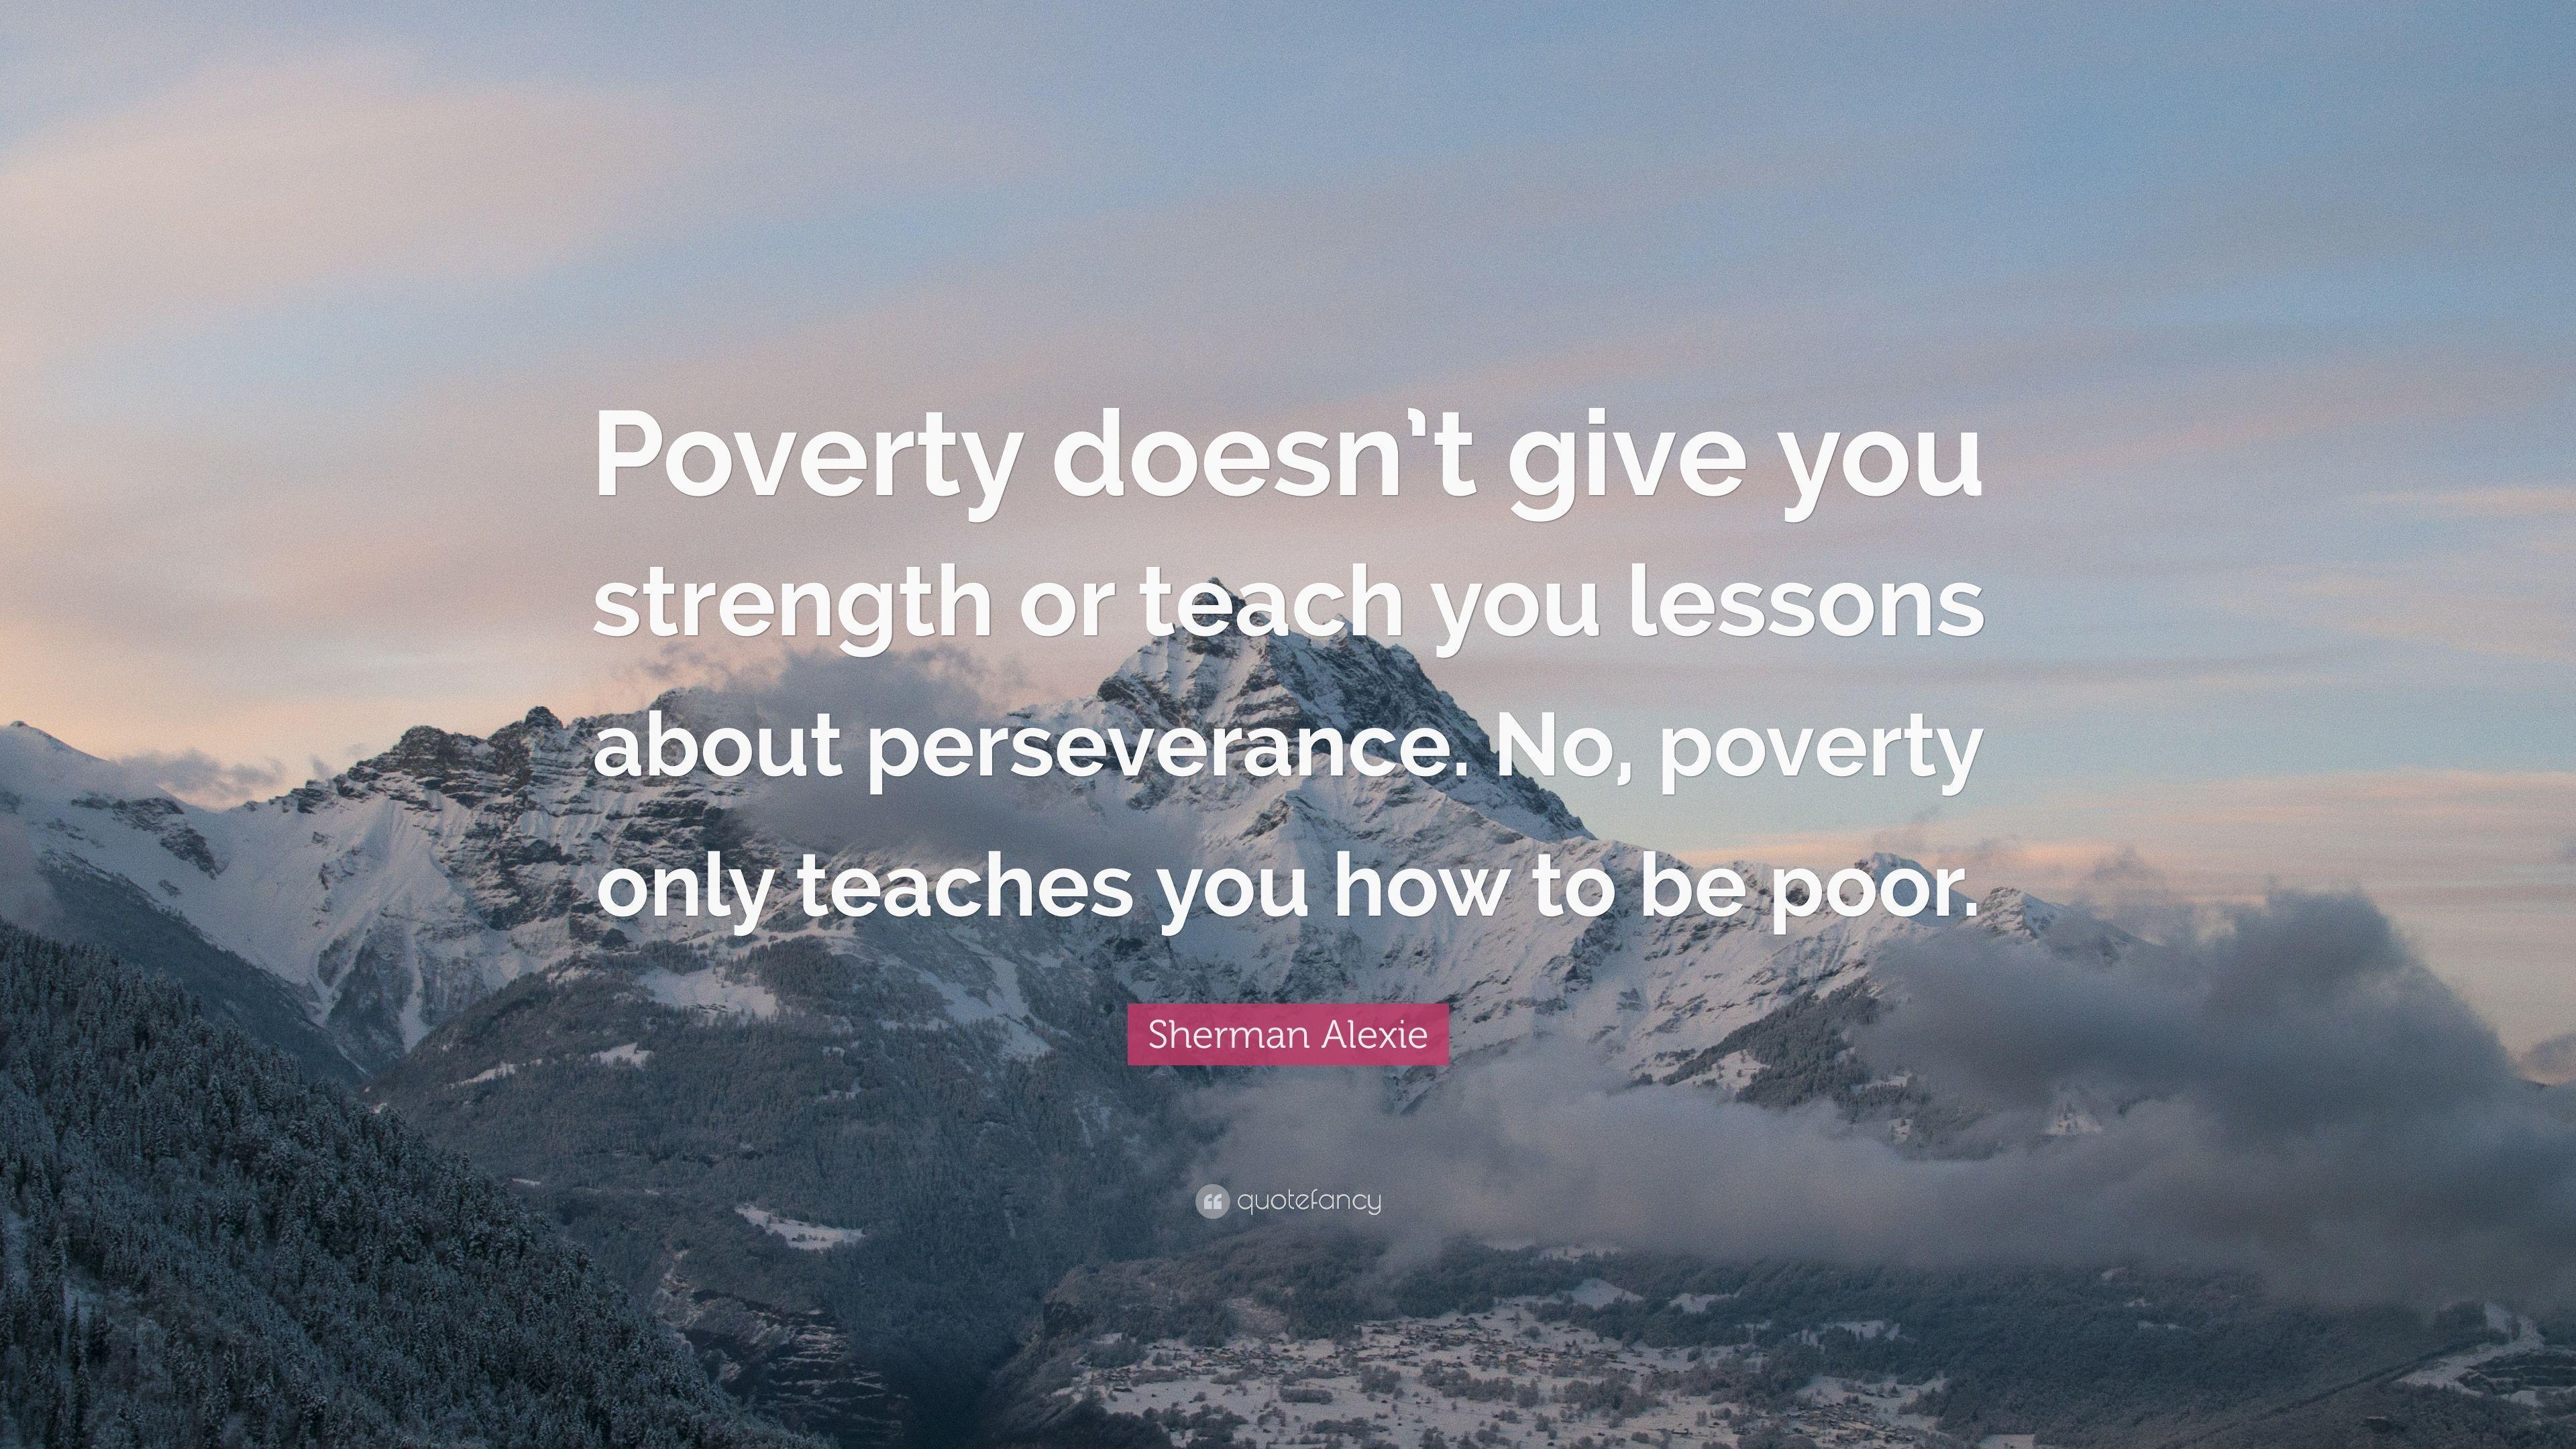 Sherman Alexie Quote: “Poverty doesn't give you strength or teach